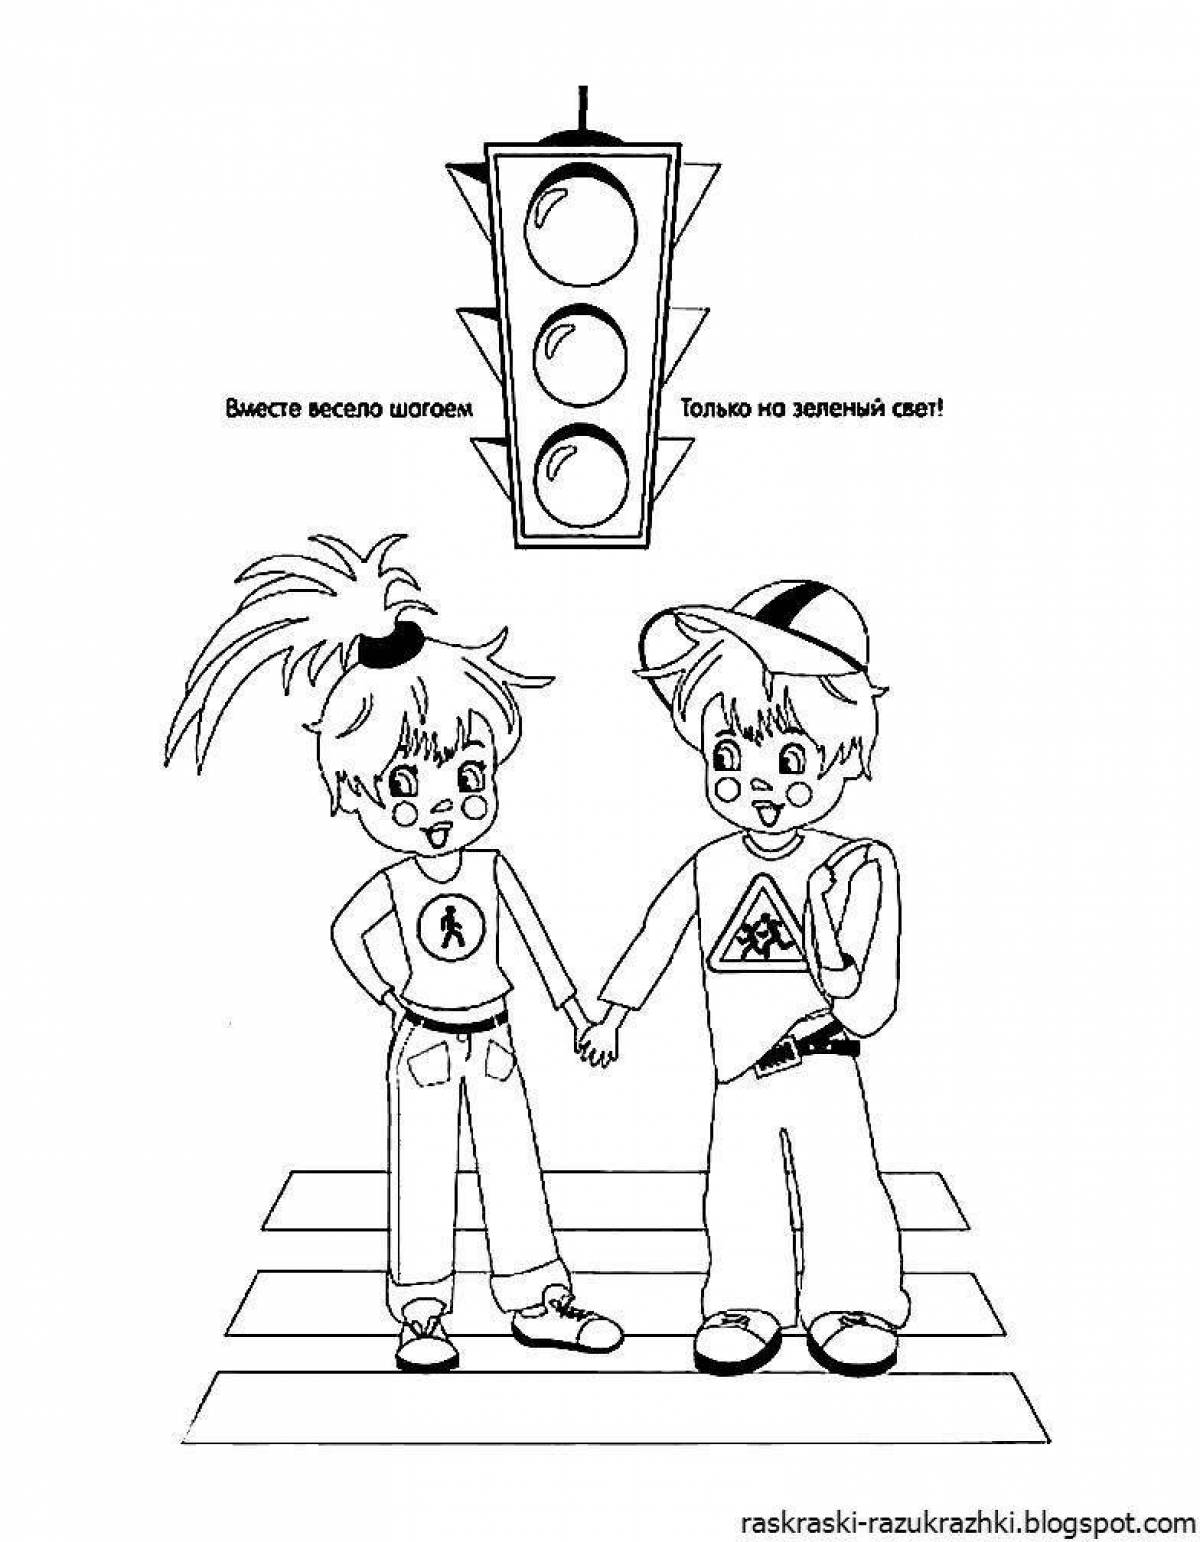 Colorful rules of the road coloring book for elementary school